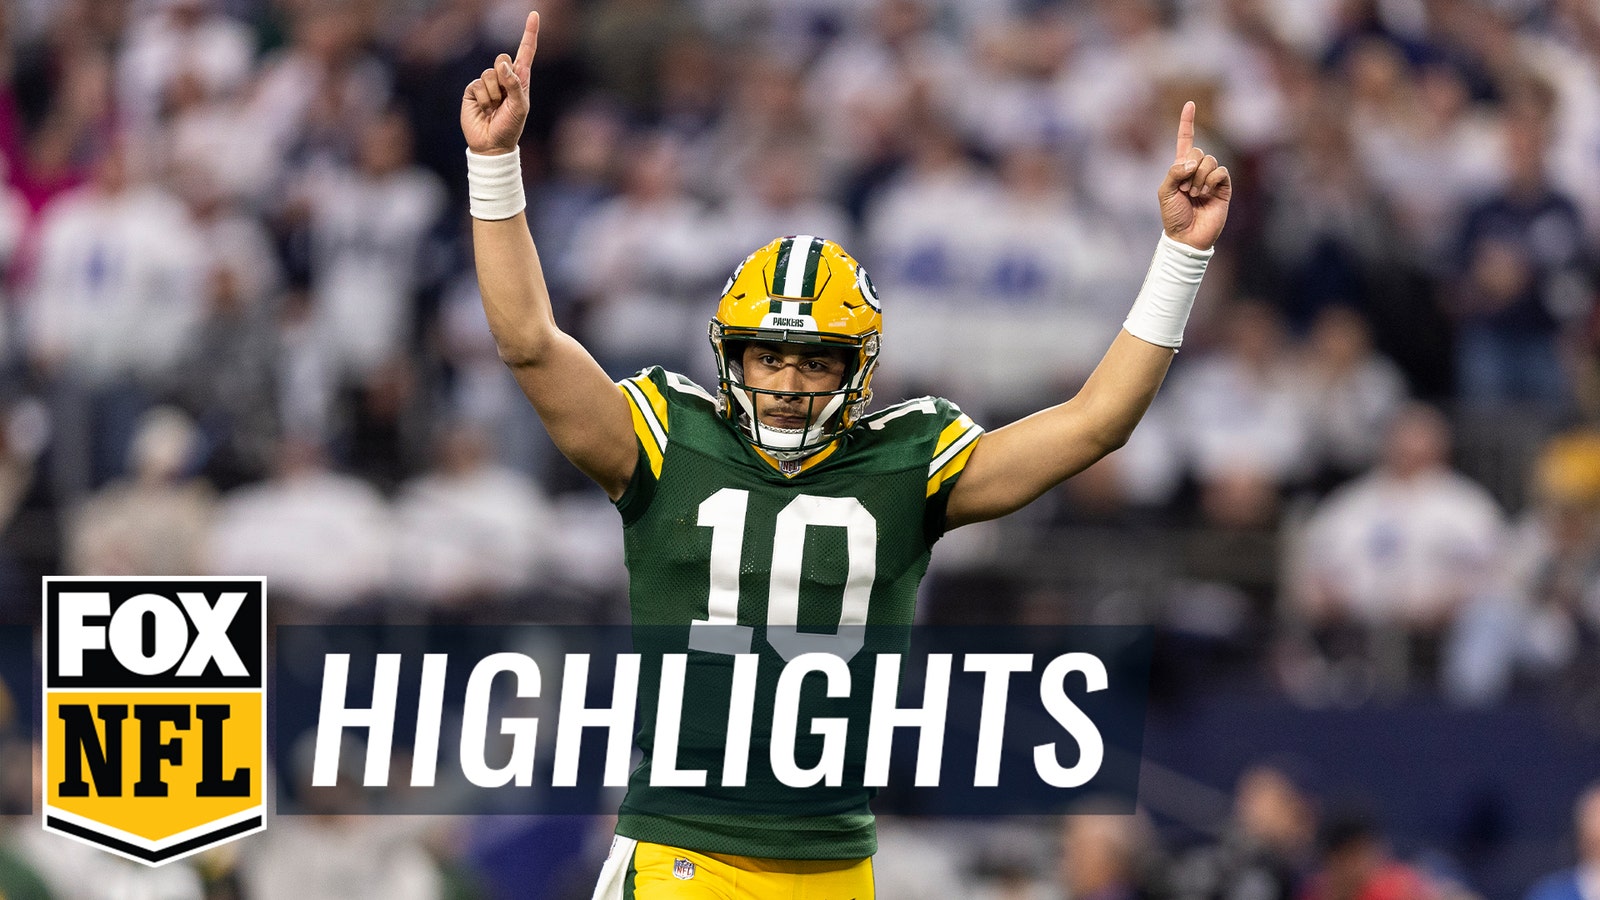 Jordan Love throws for 272 yards and three TDs in Packers' 48-32 win over Cowboys 